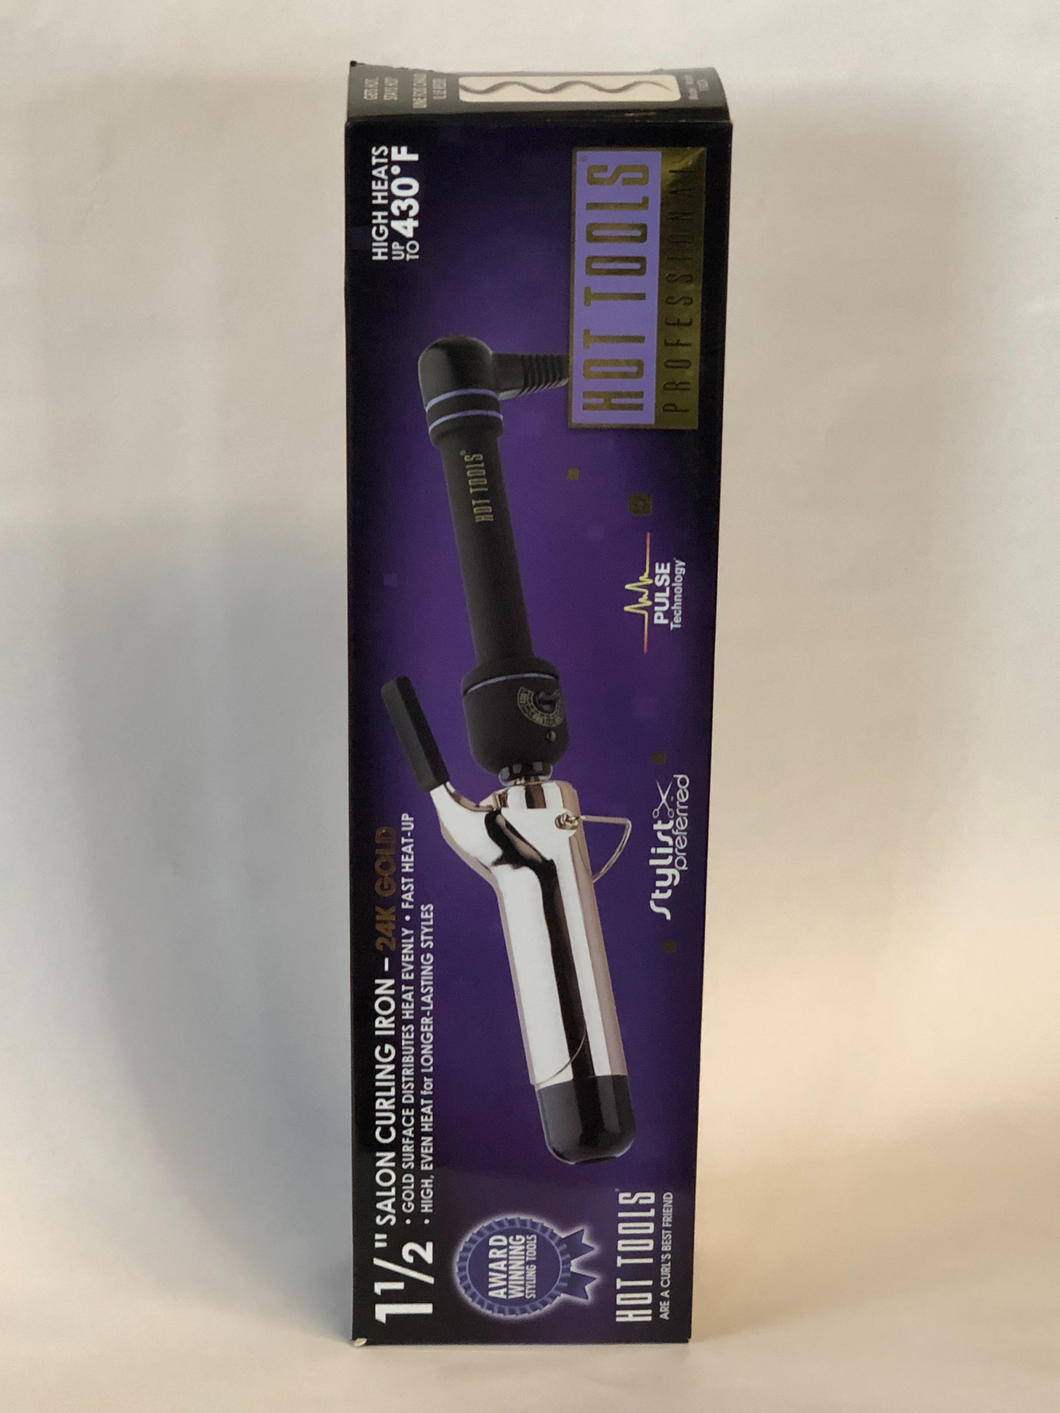 Hot Tools Curling Iron-one and a half inch (1 1/2